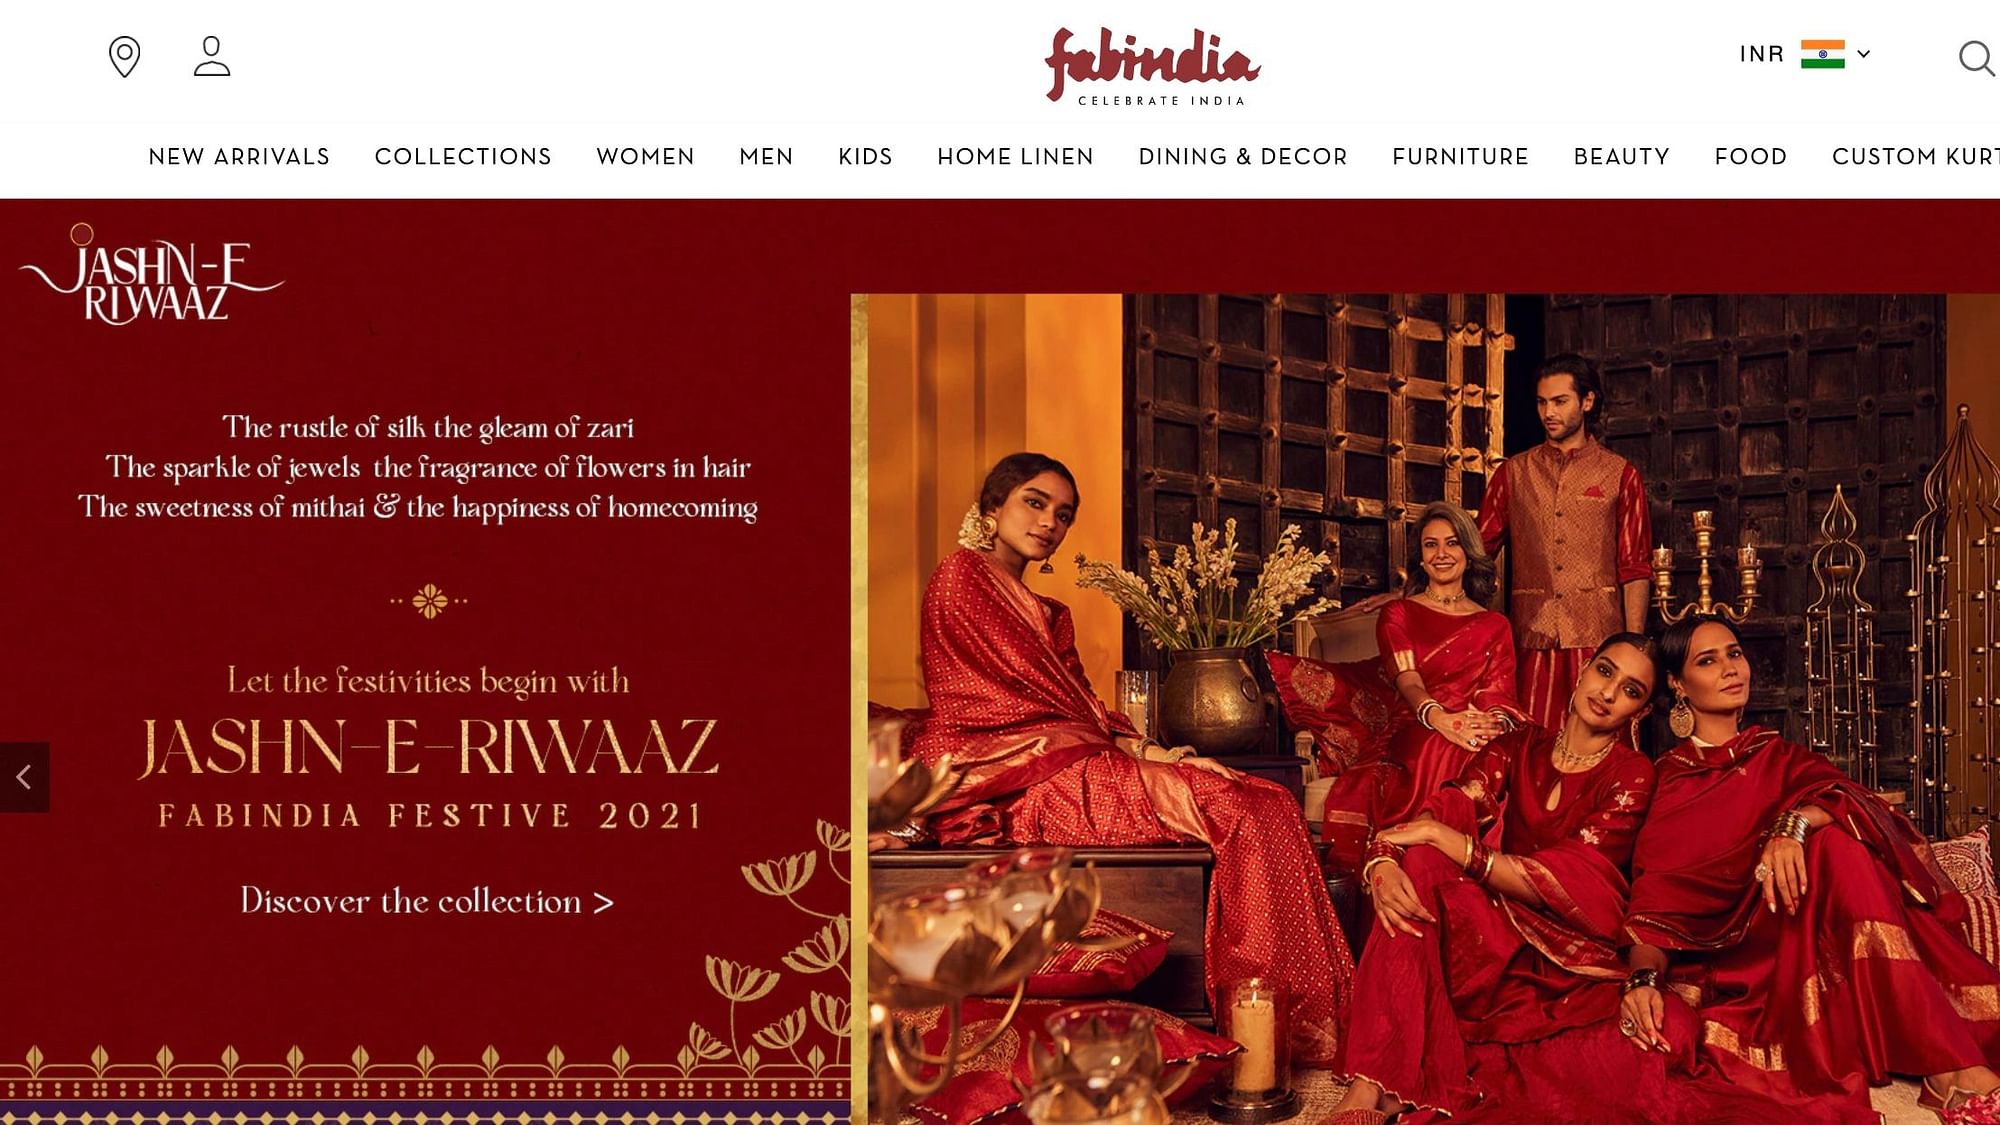 jashn-e-riwaaz' was not our diwali collection: fabindia, amid controversy